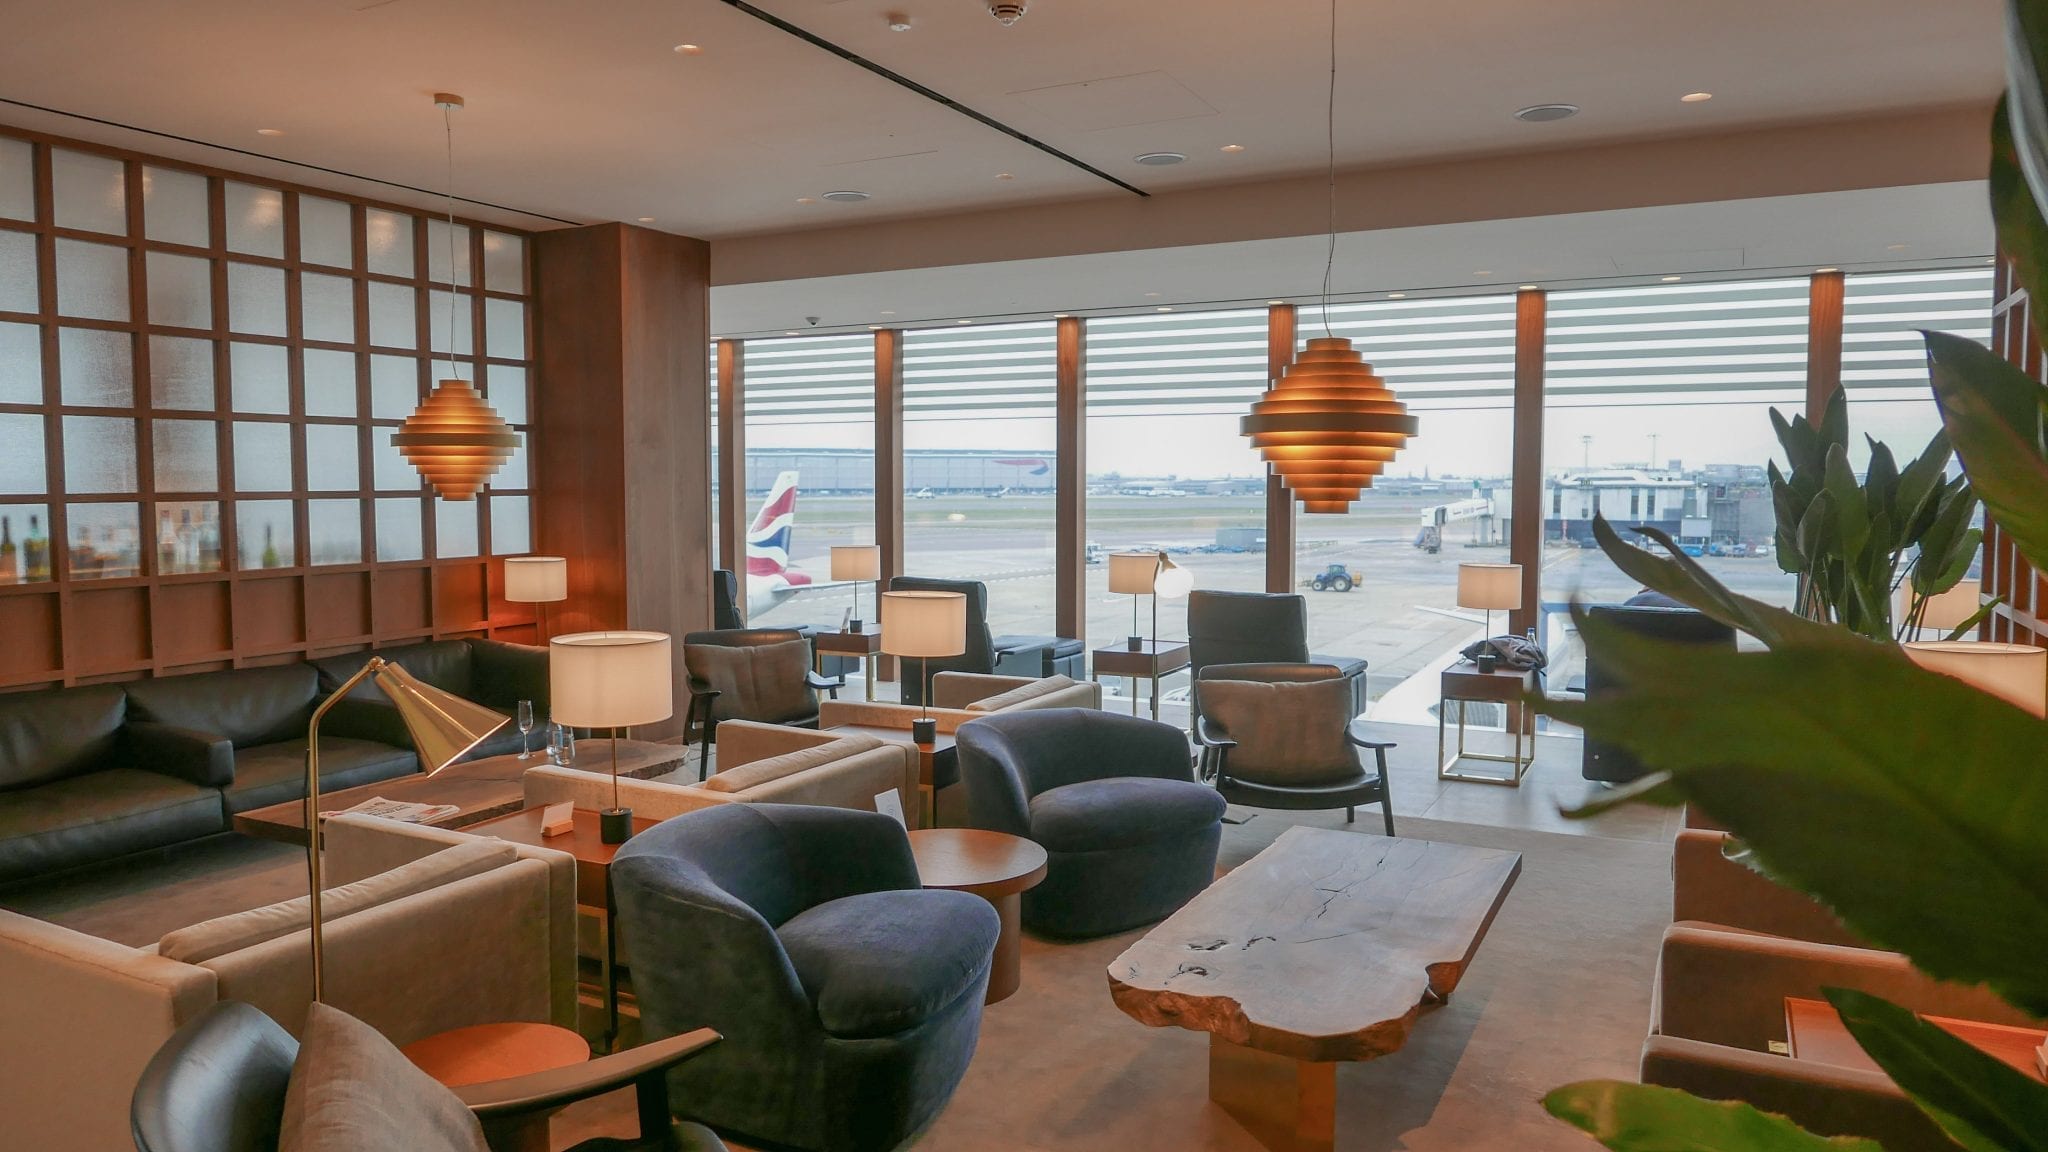 New CX Lounges T3 16 - £1111 r/t from LHR to MEL/SYD on Garuda!